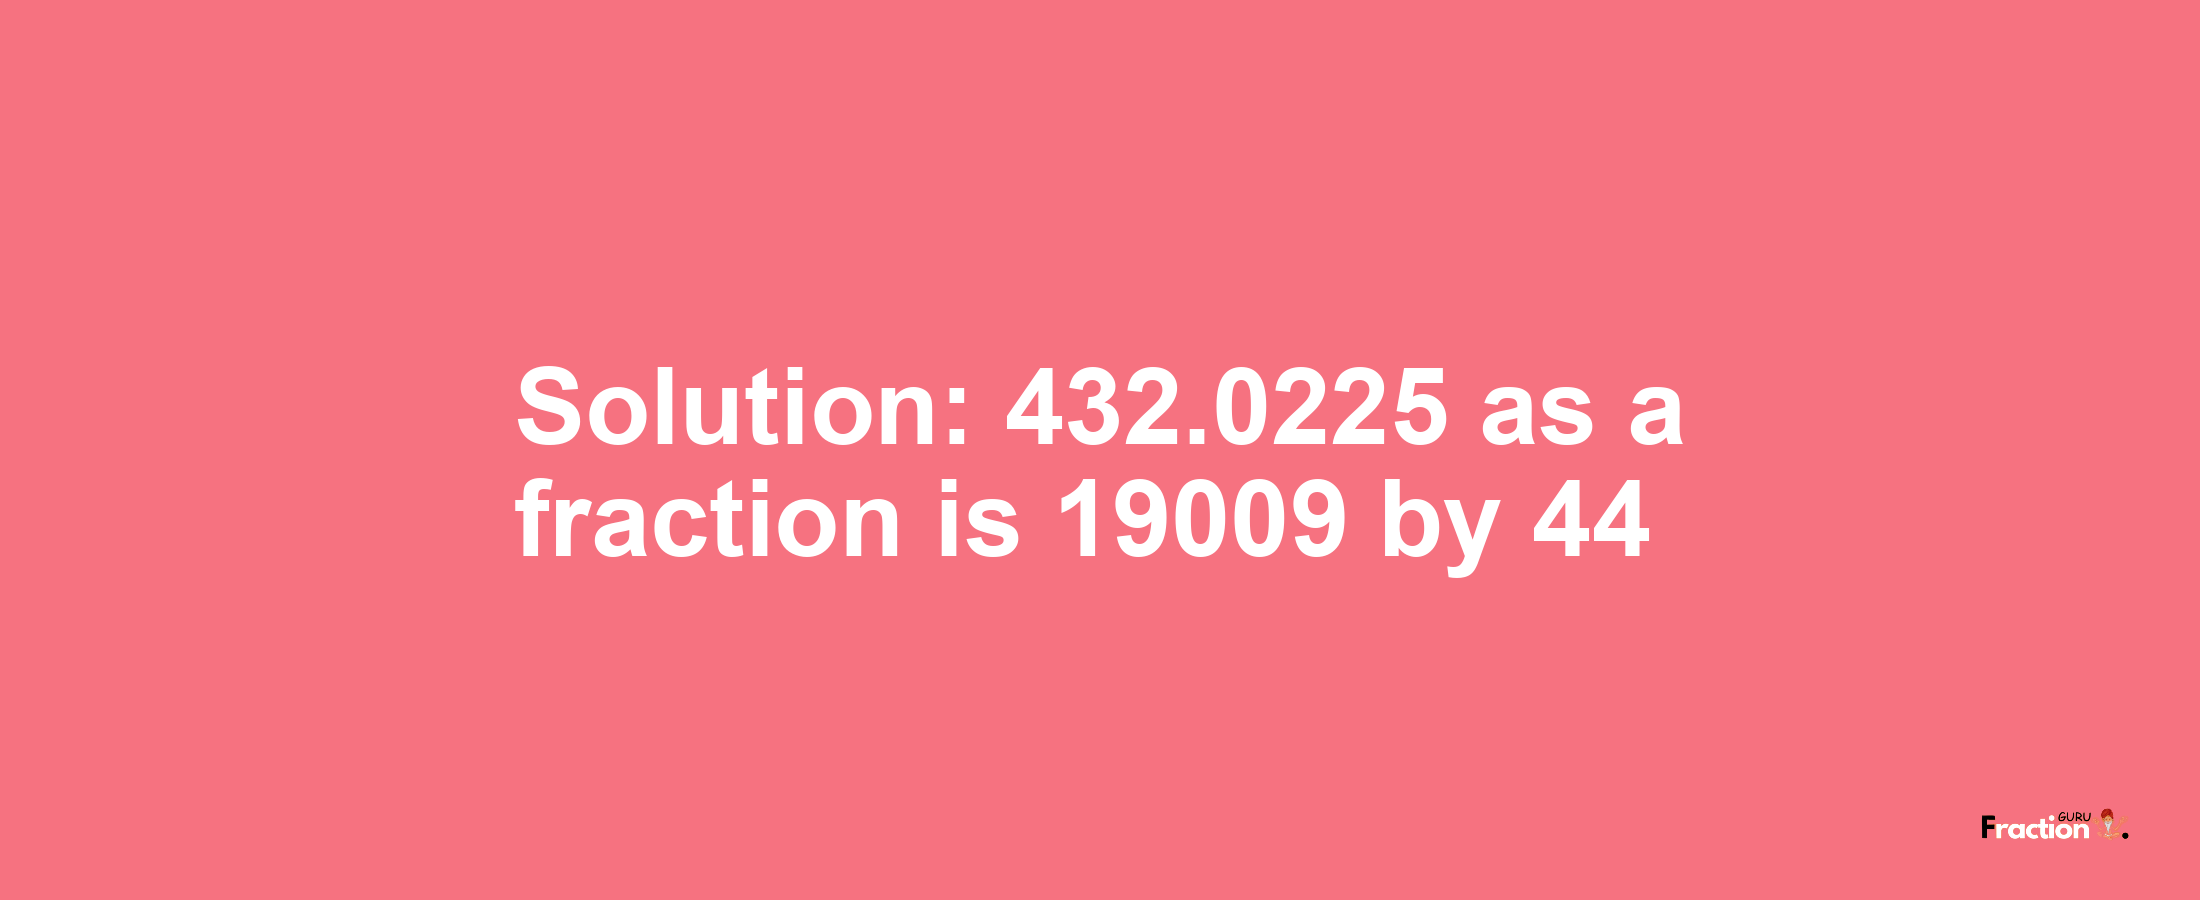 Solution:432.0225 as a fraction is 19009/44